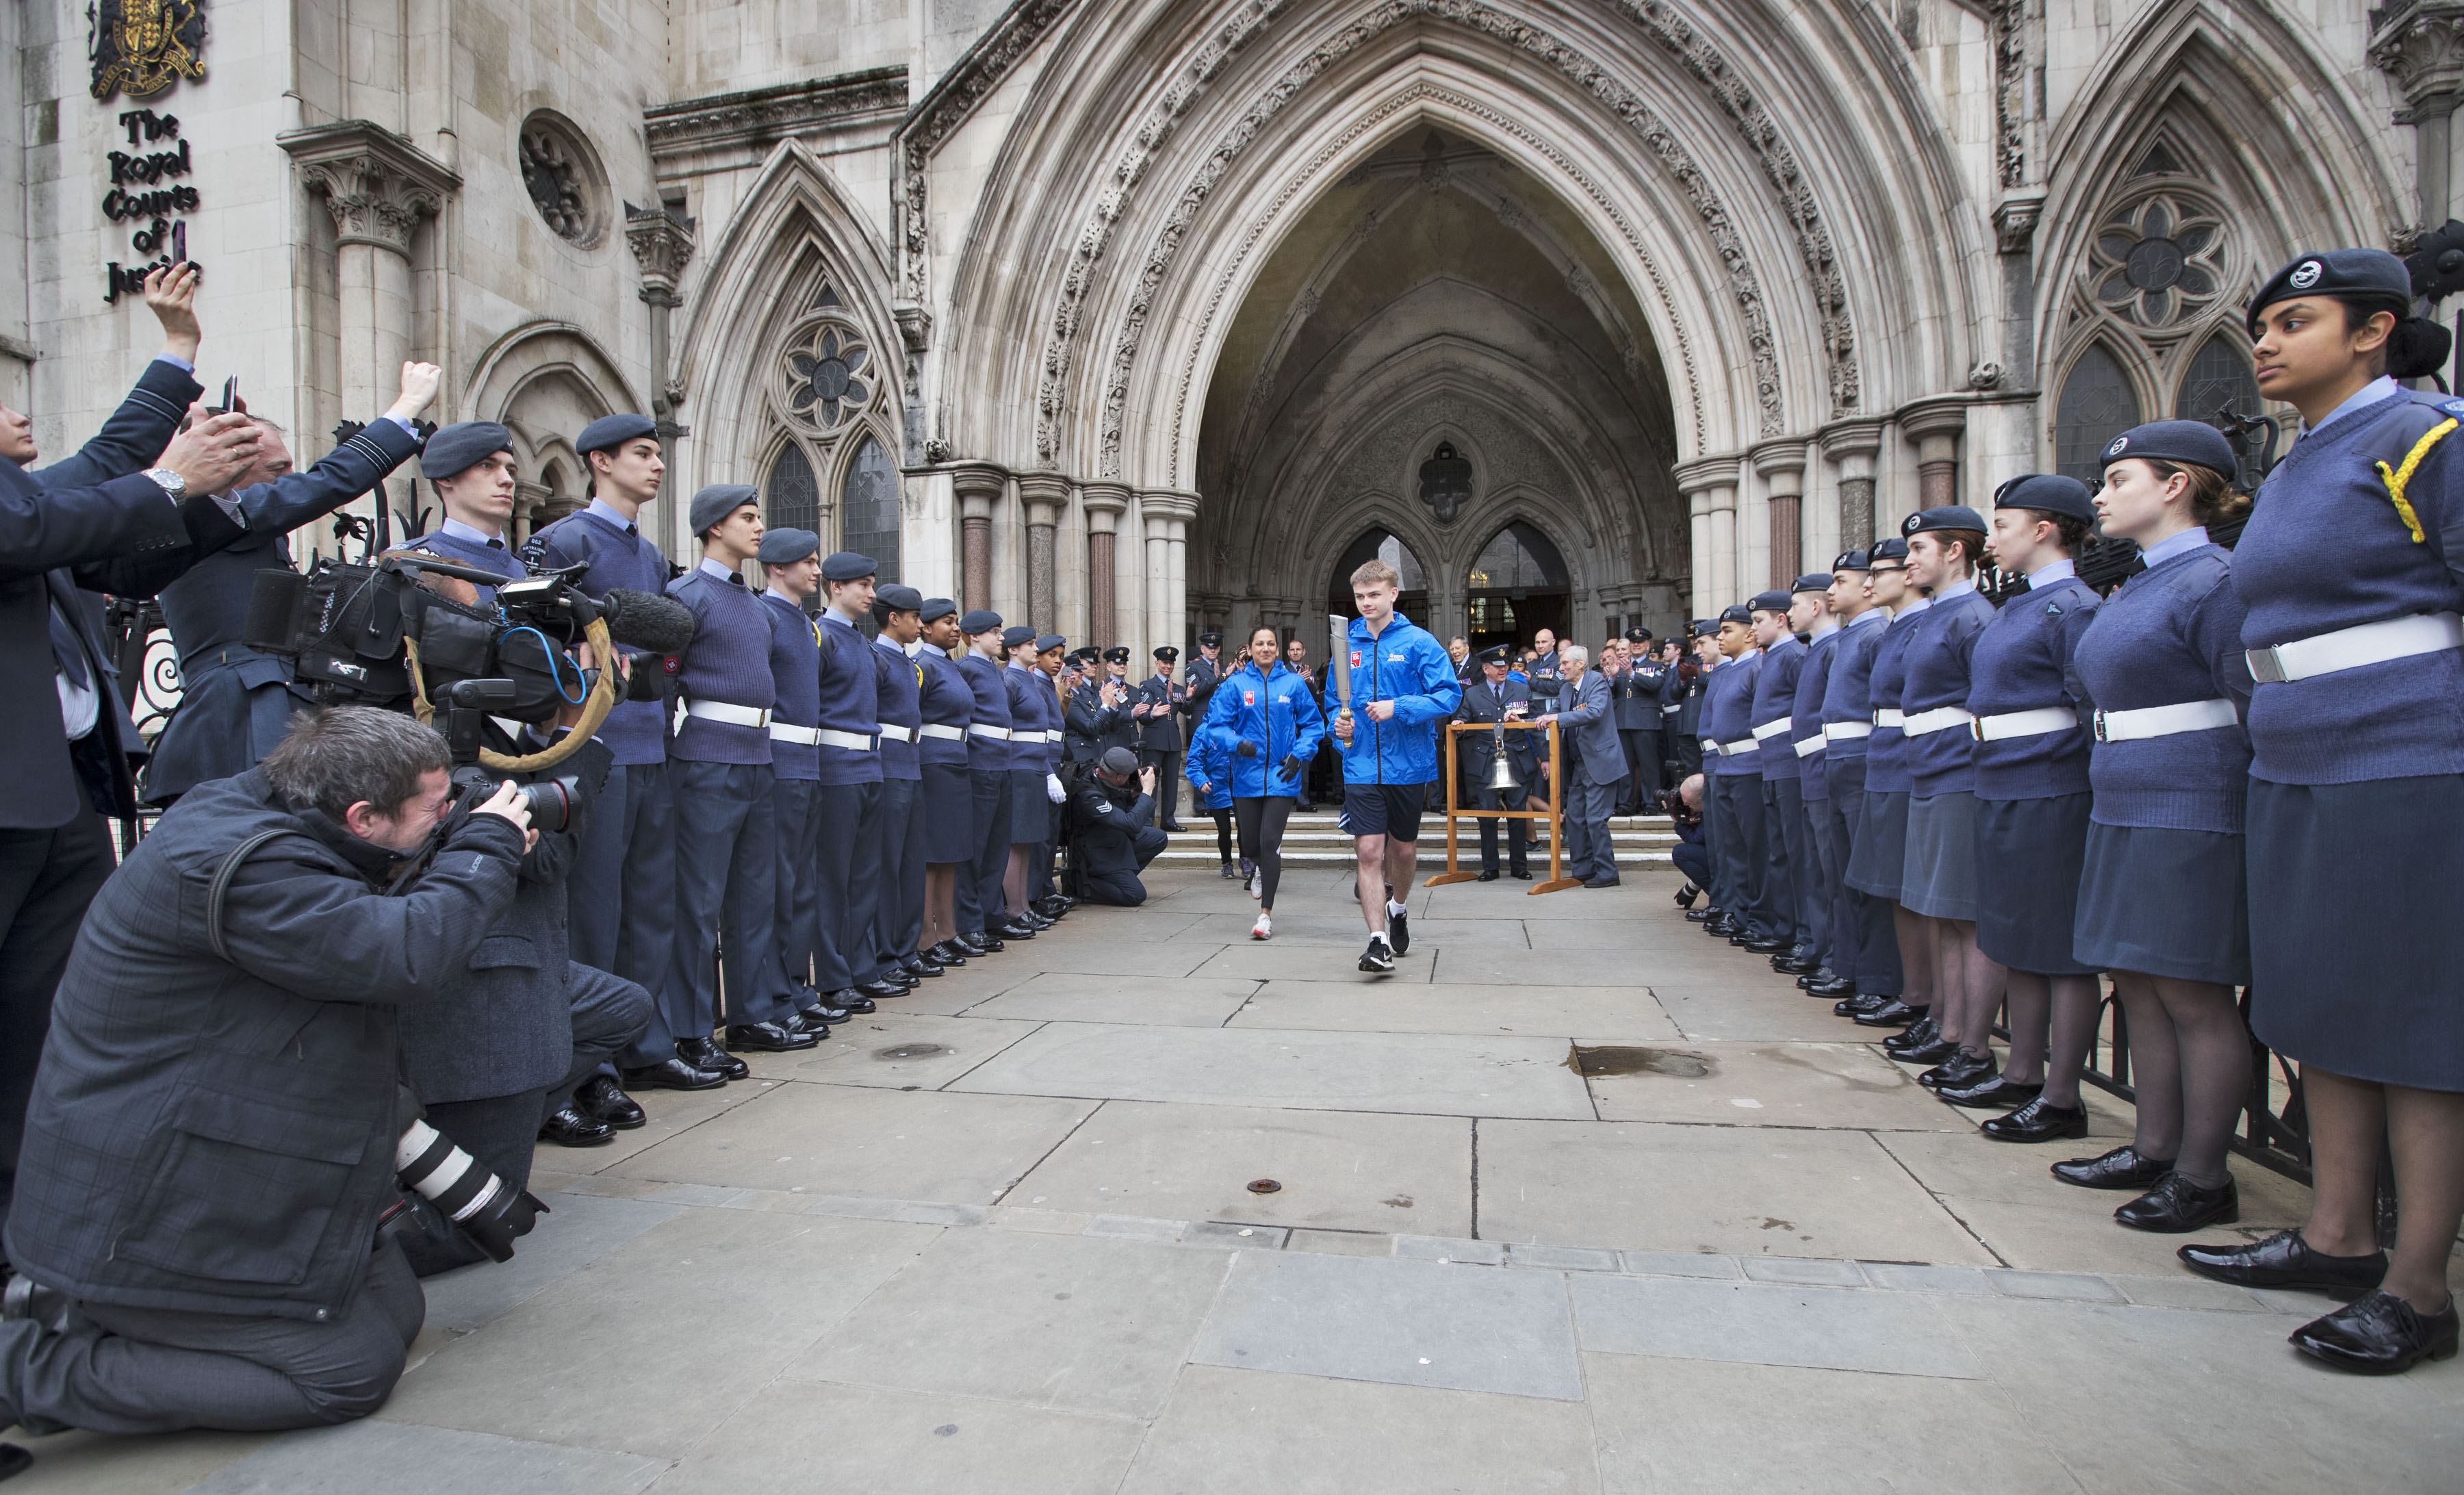 Image shows Air Cadets, aviators and a photography team watch the baton relay.